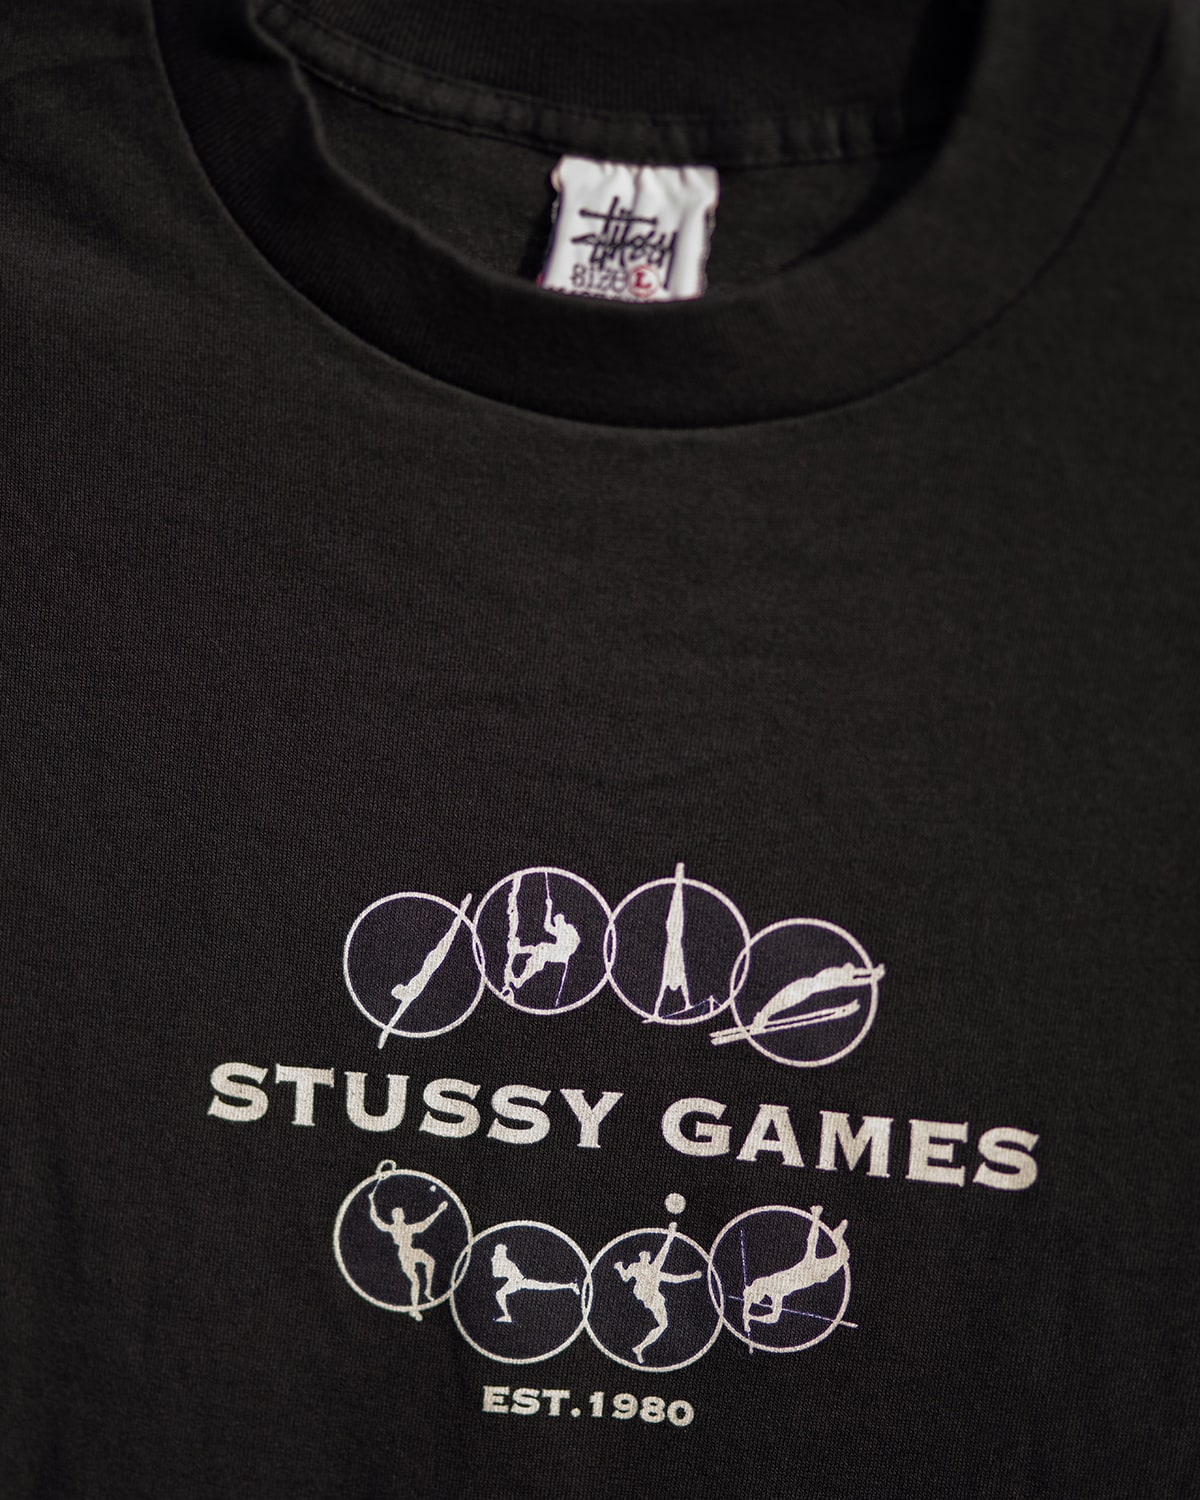 STUSSY – The Archivist Store